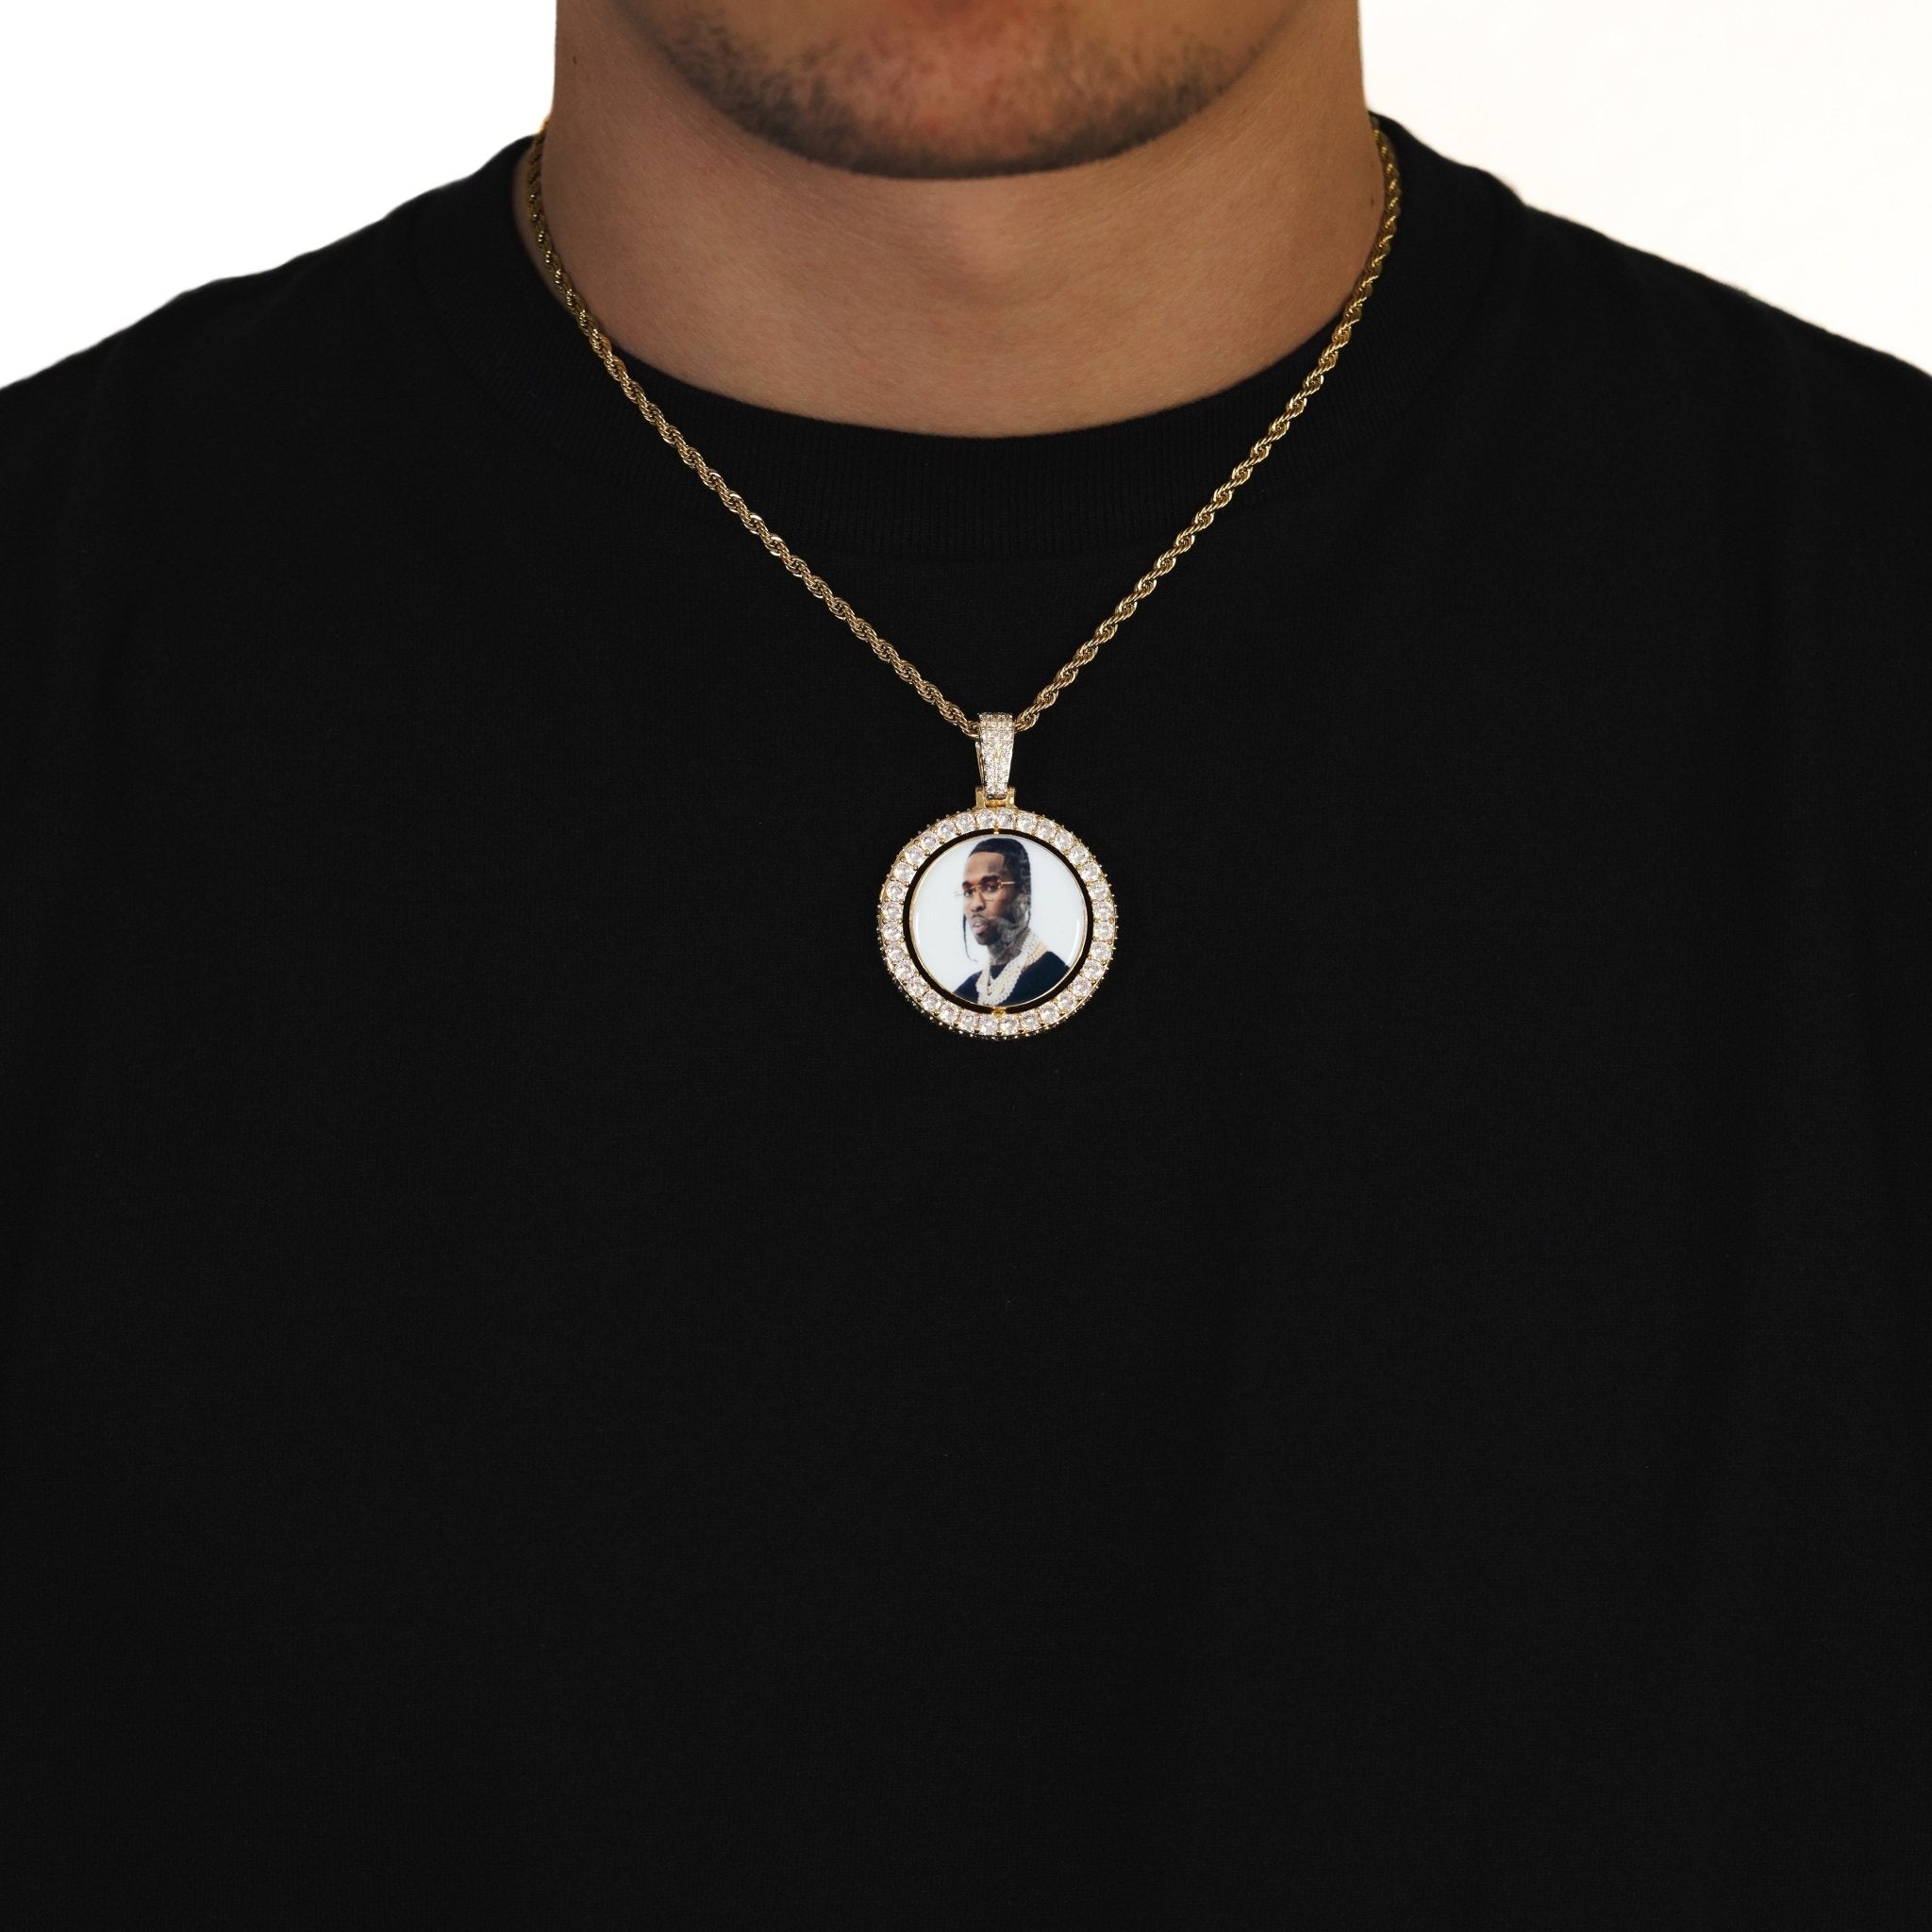 Double Sided Photo Pendant CRNCY